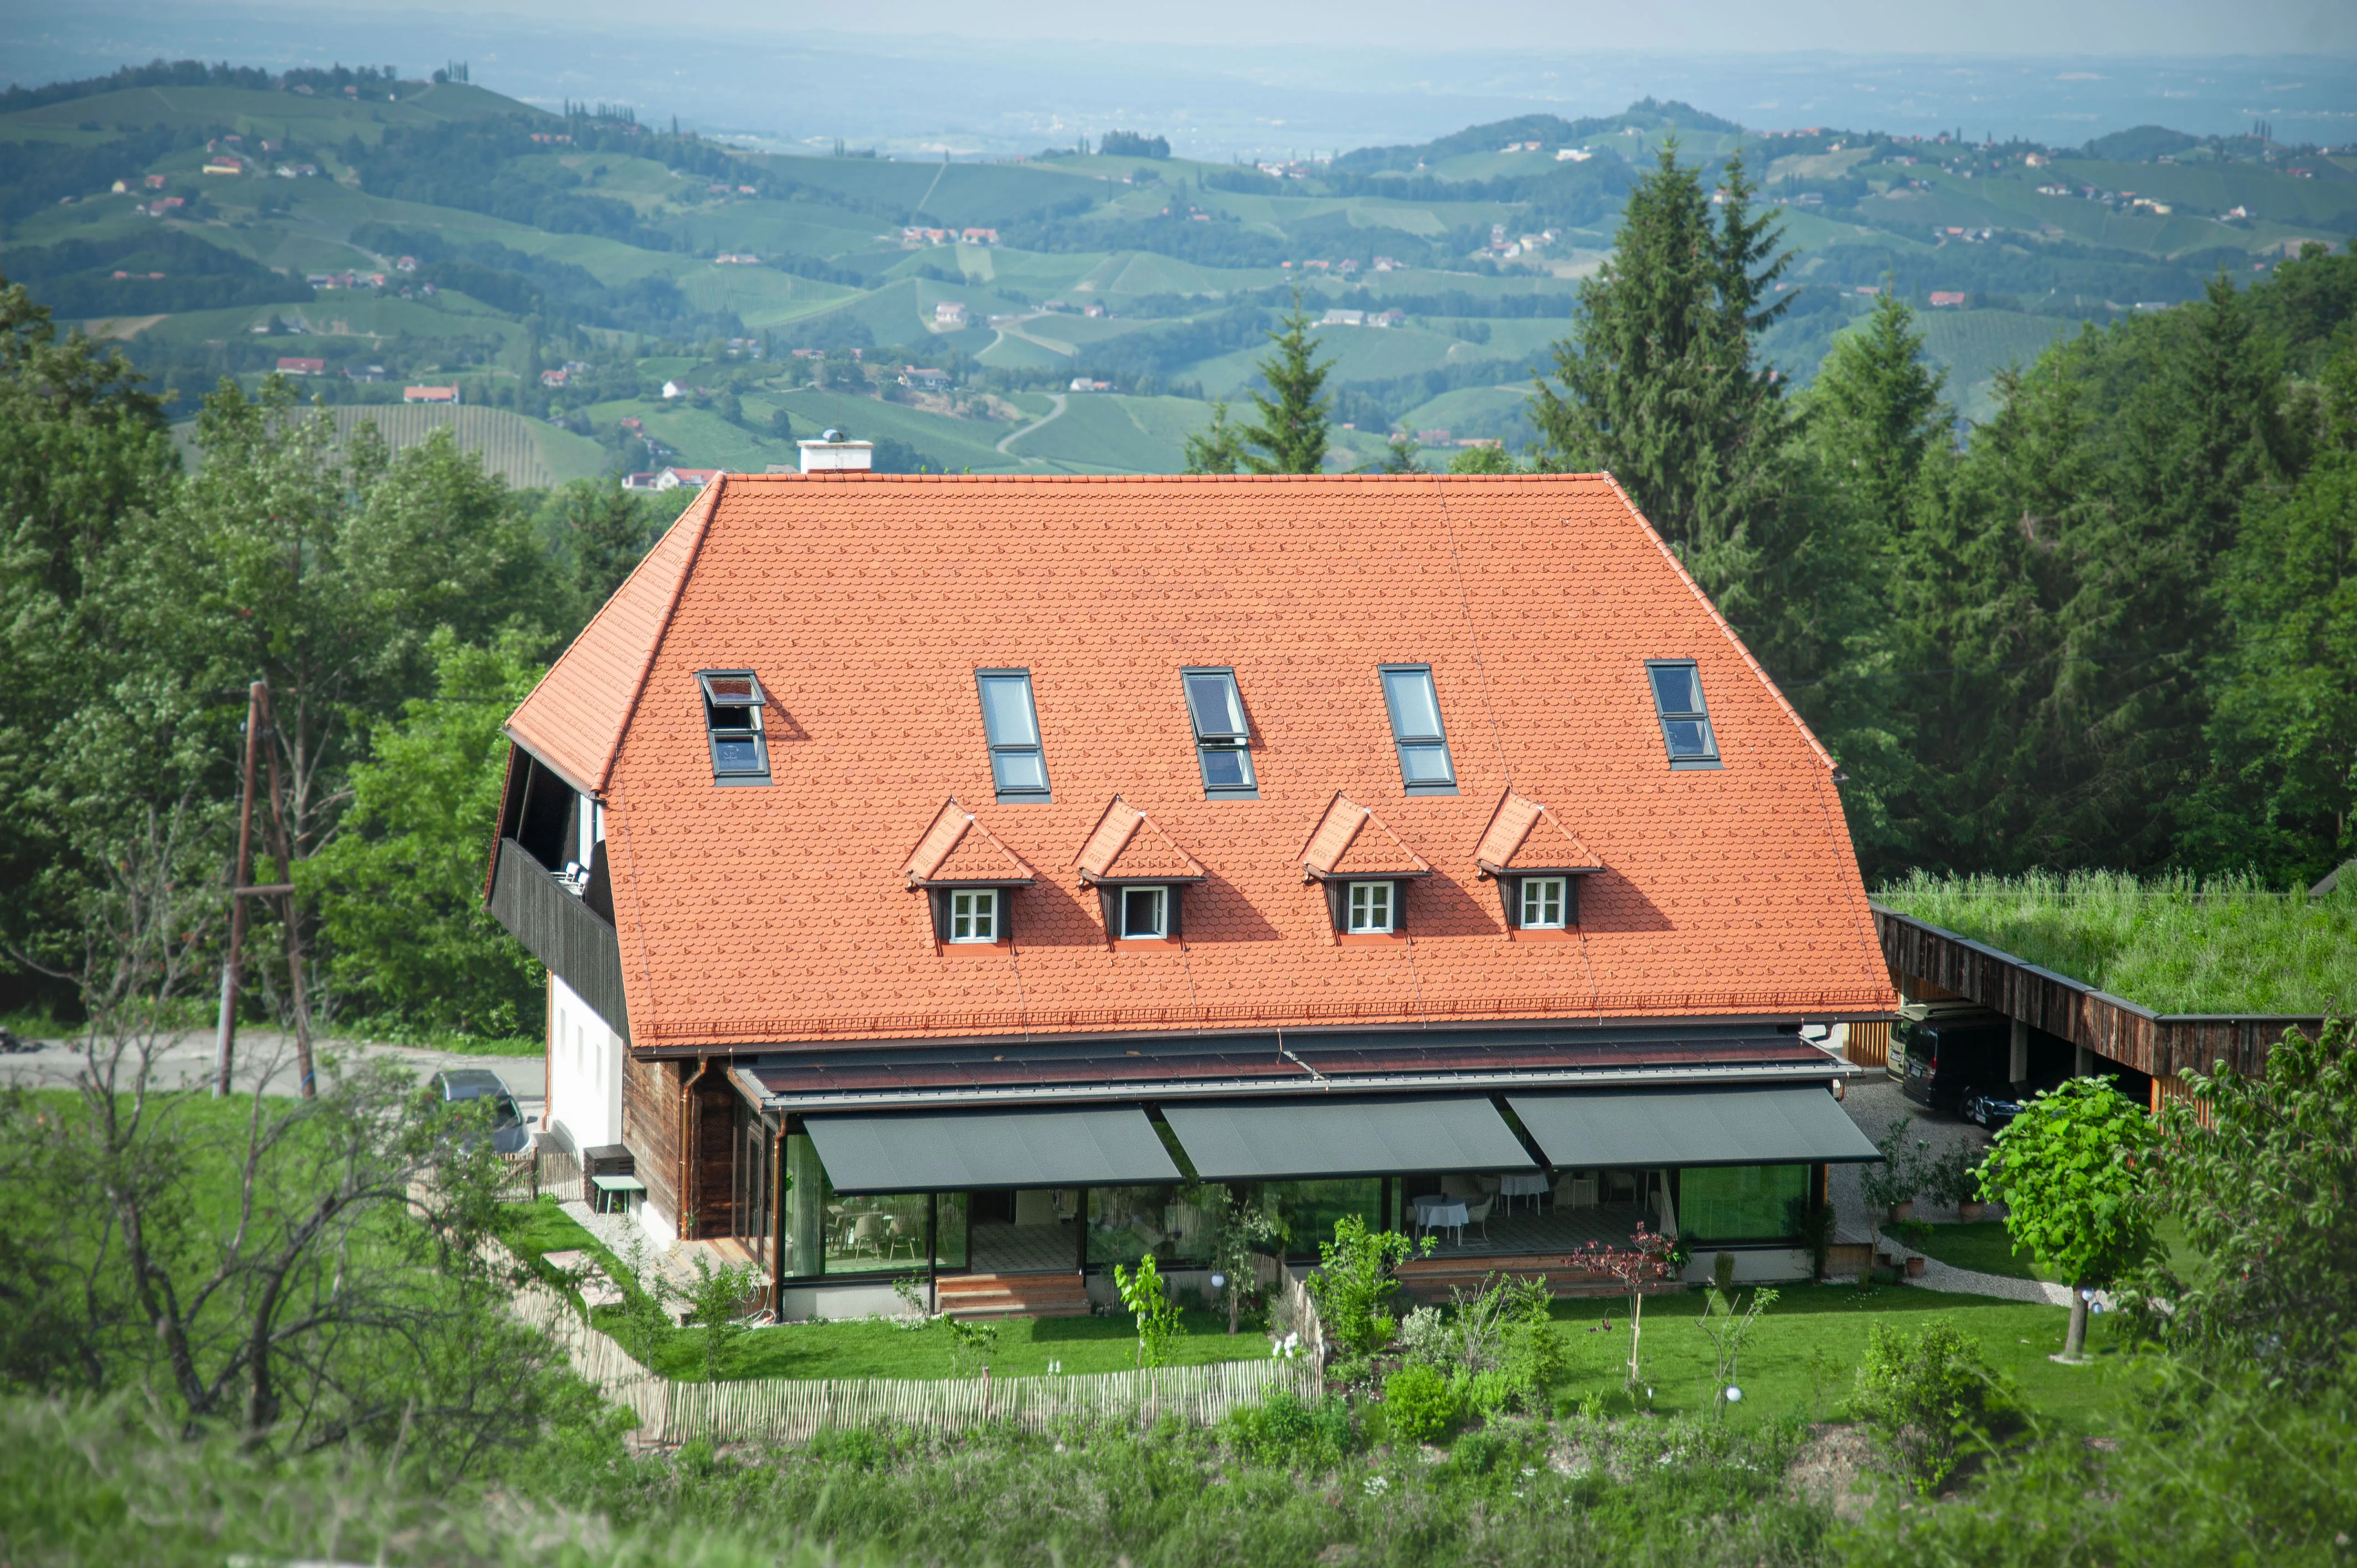 A photo of the guesthouse surrounded by the picturesque landscape of southern Styria.